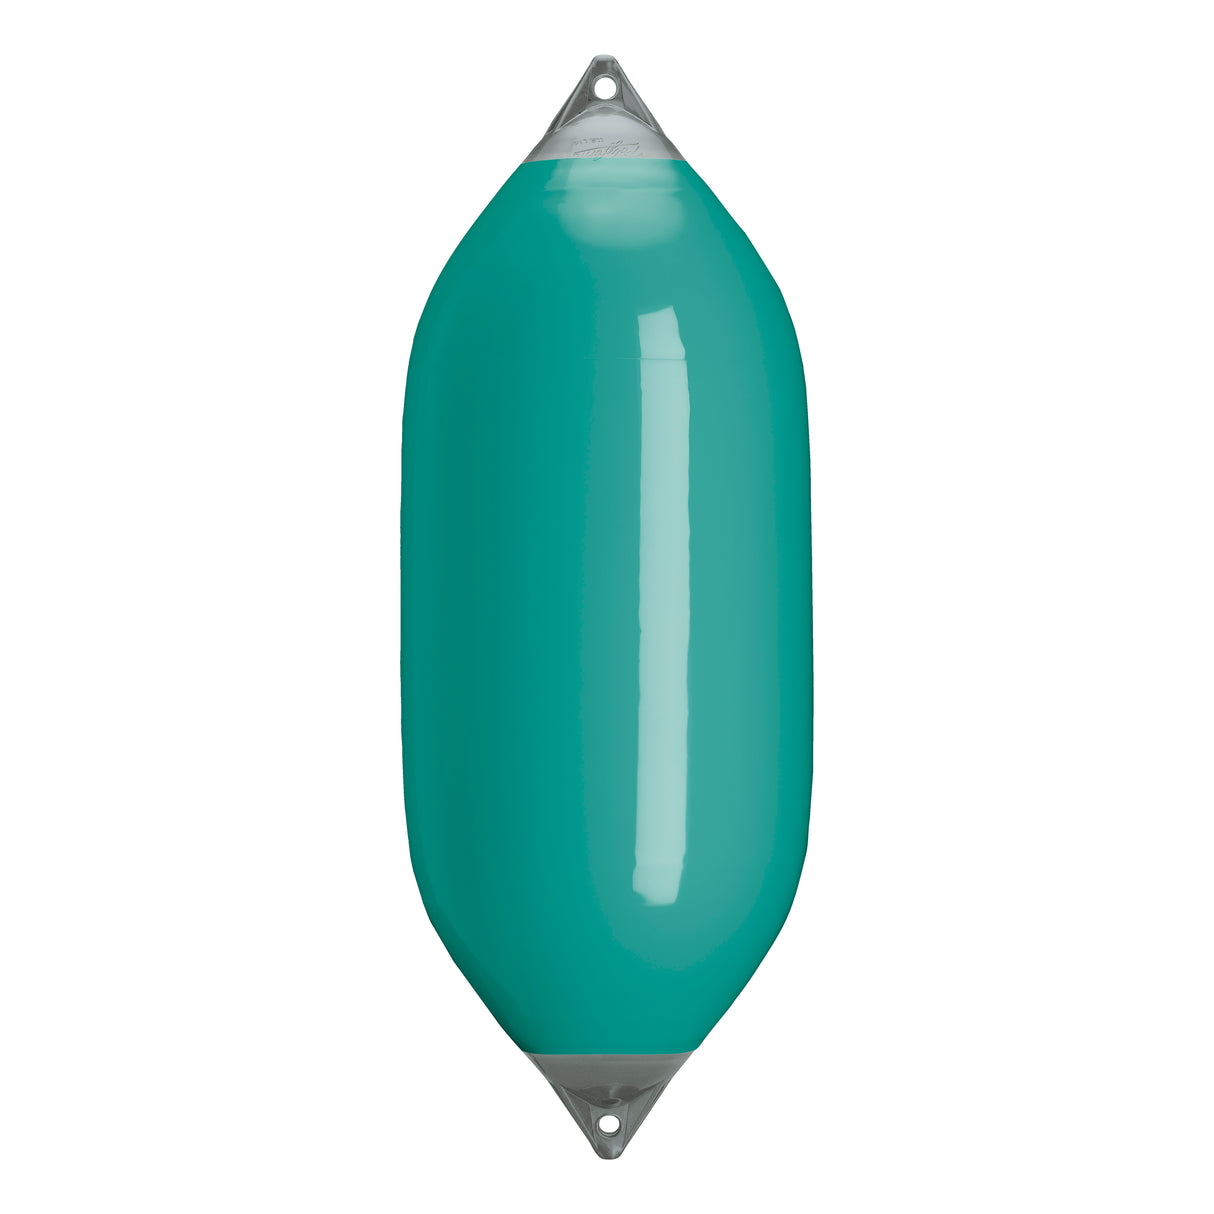 Teal boat fender with Grey-Top, Polyform F-11